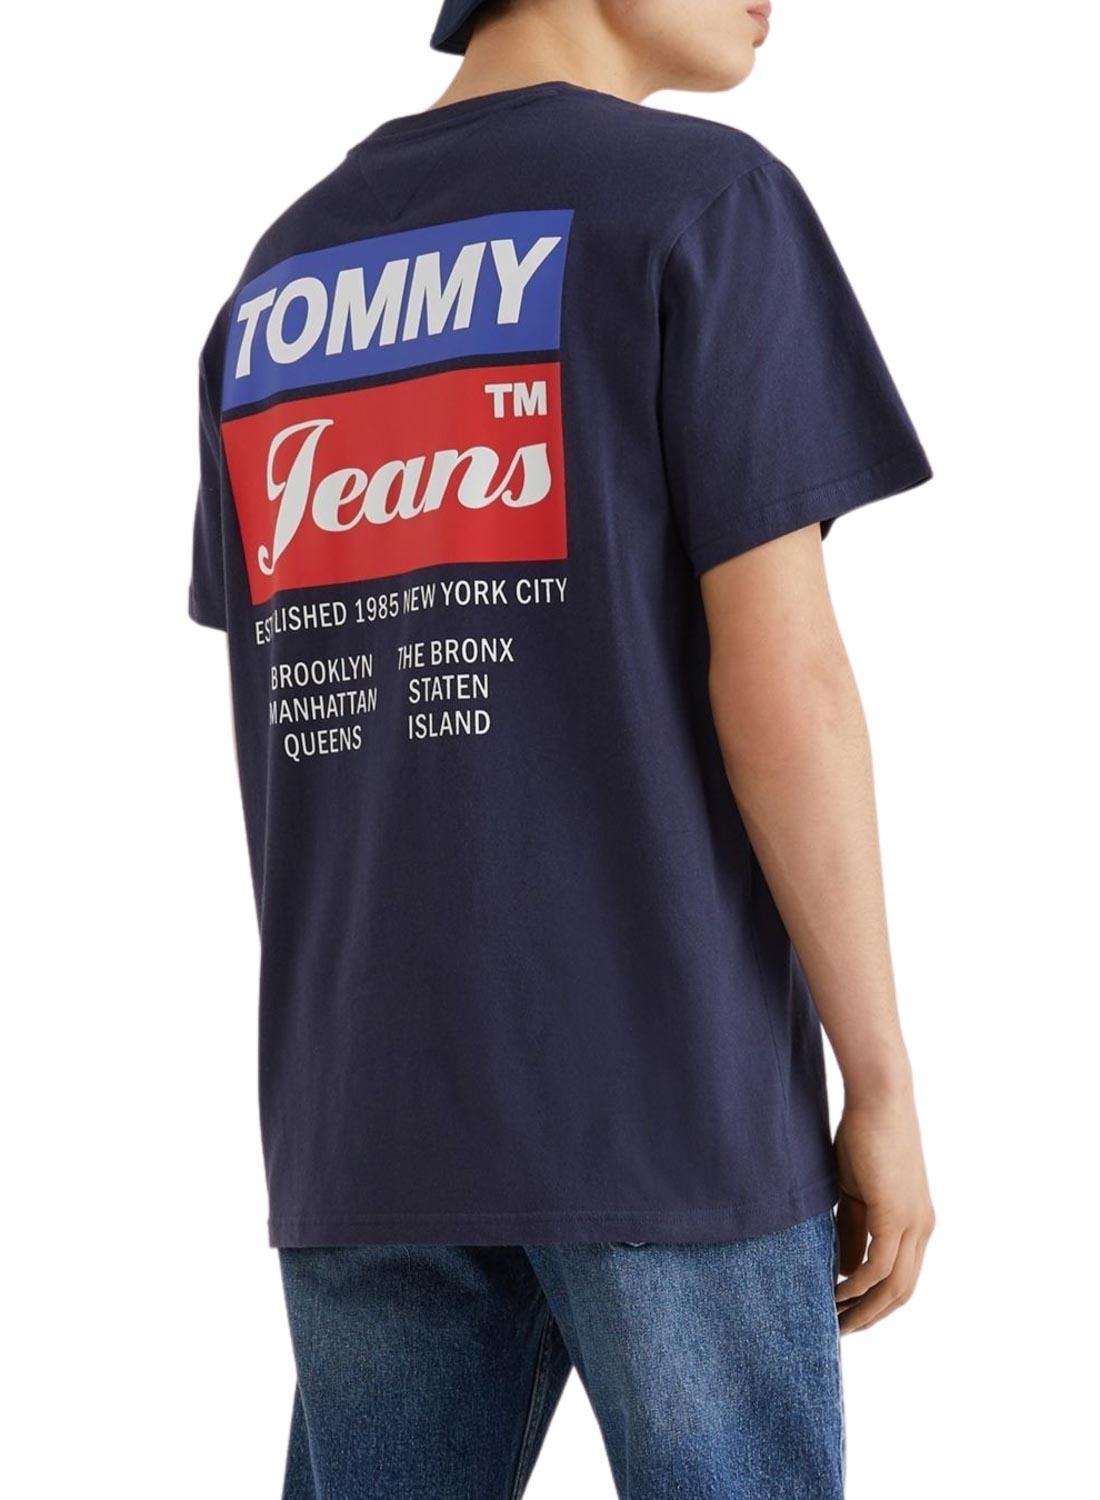 T-Shirt Tommy Jeans Logo Posteriore Blu Navy Uomo